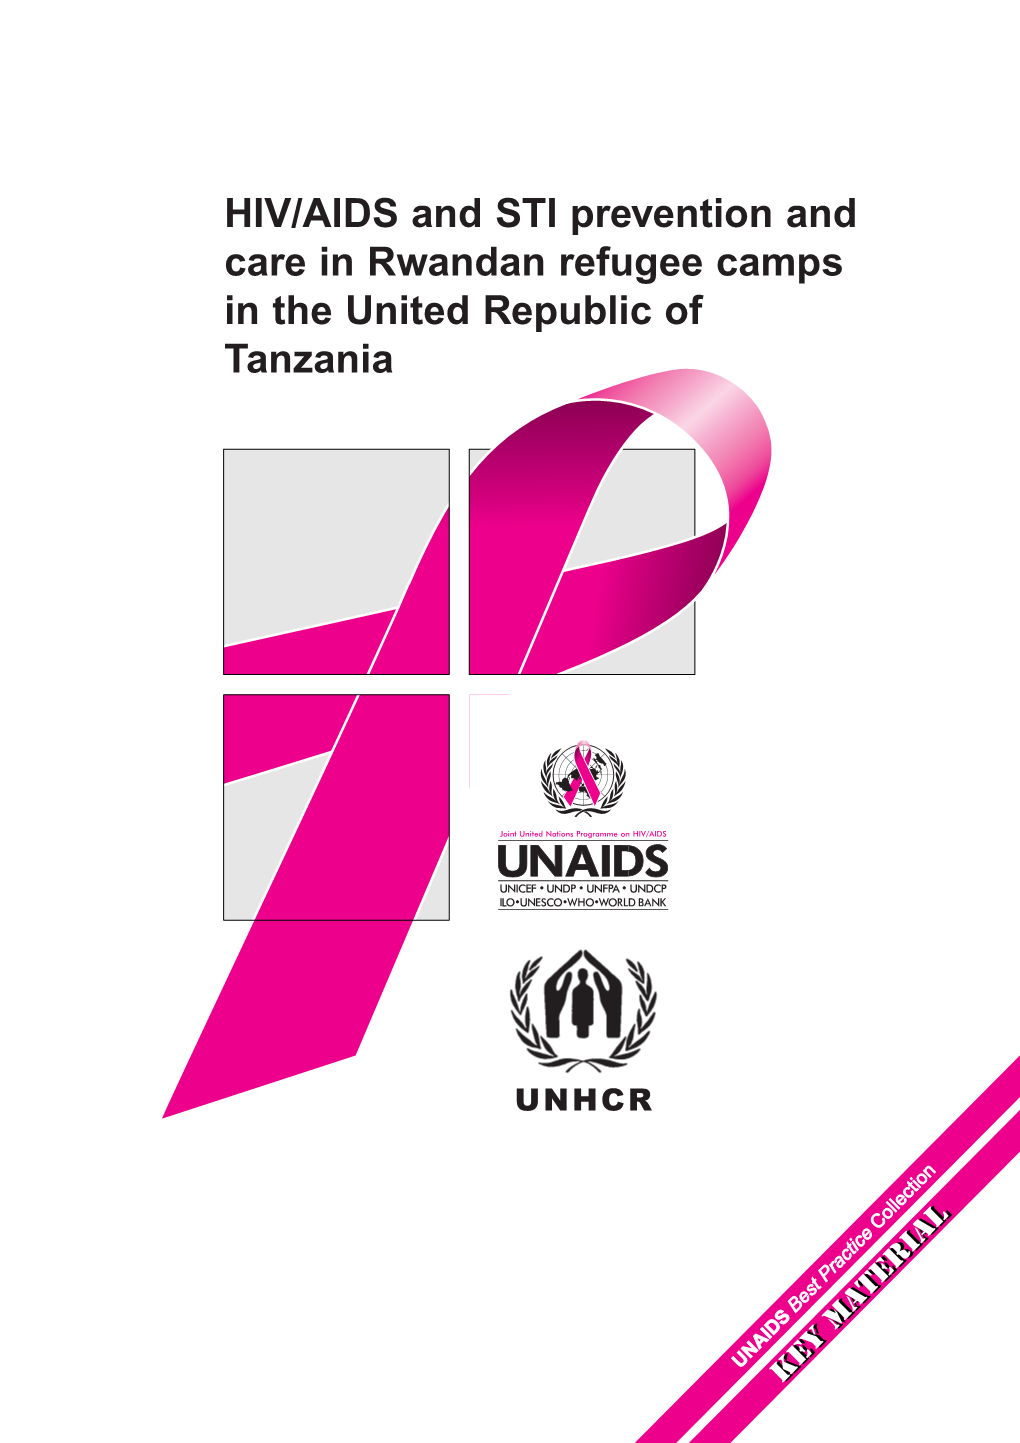 HIV/AIDS and STI Prevention and Care in Rwandan Refugee Camps in the United Republic of Tanzania